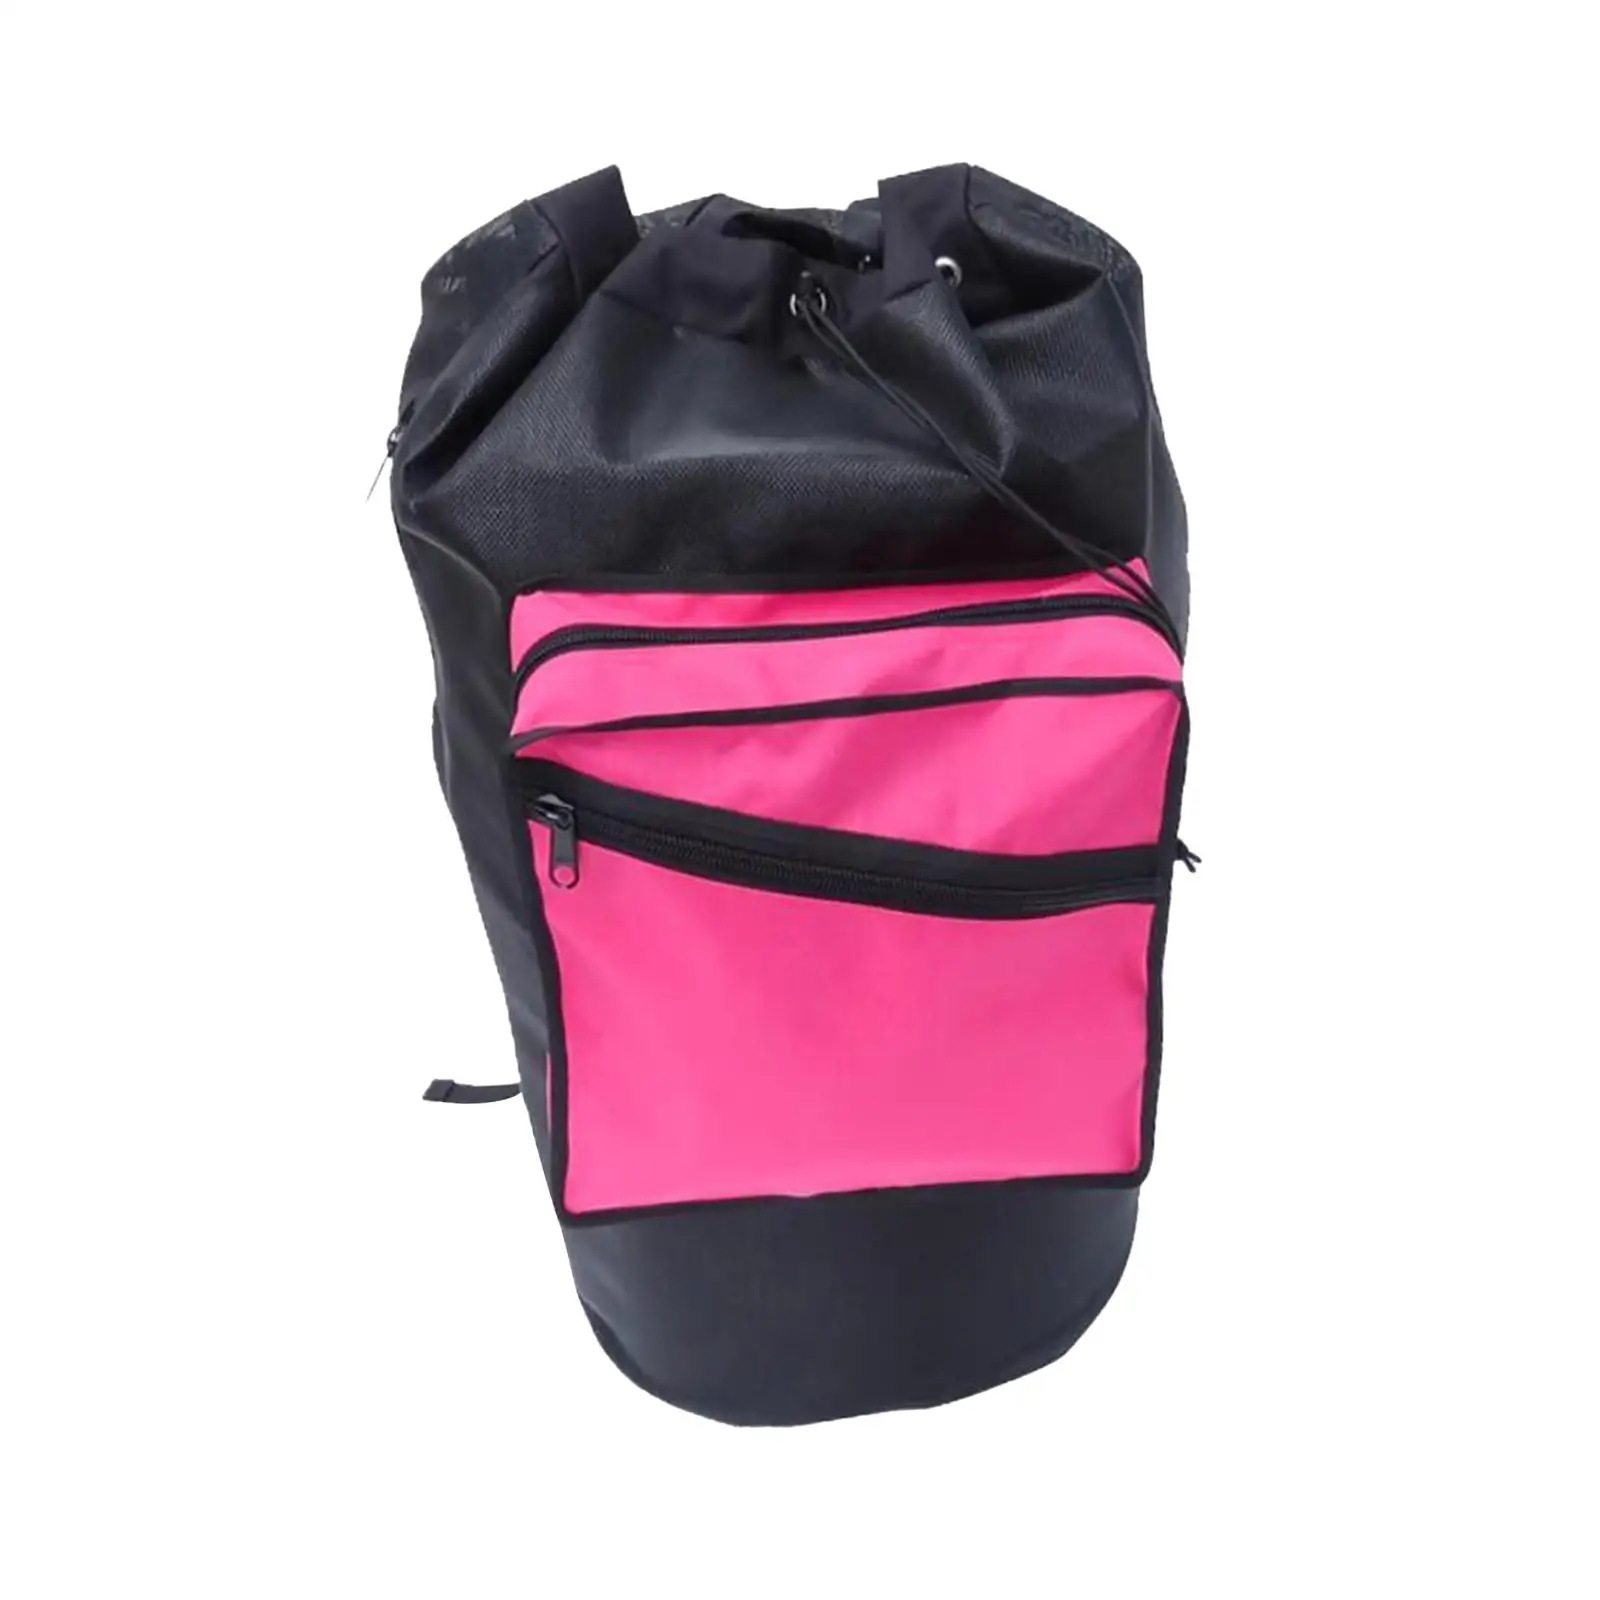 Scuba Diving Backpack Dry Wet Separation Storage Snorkeling Backpack for Beach Surfing Water Sports Underwater Adventure Boating